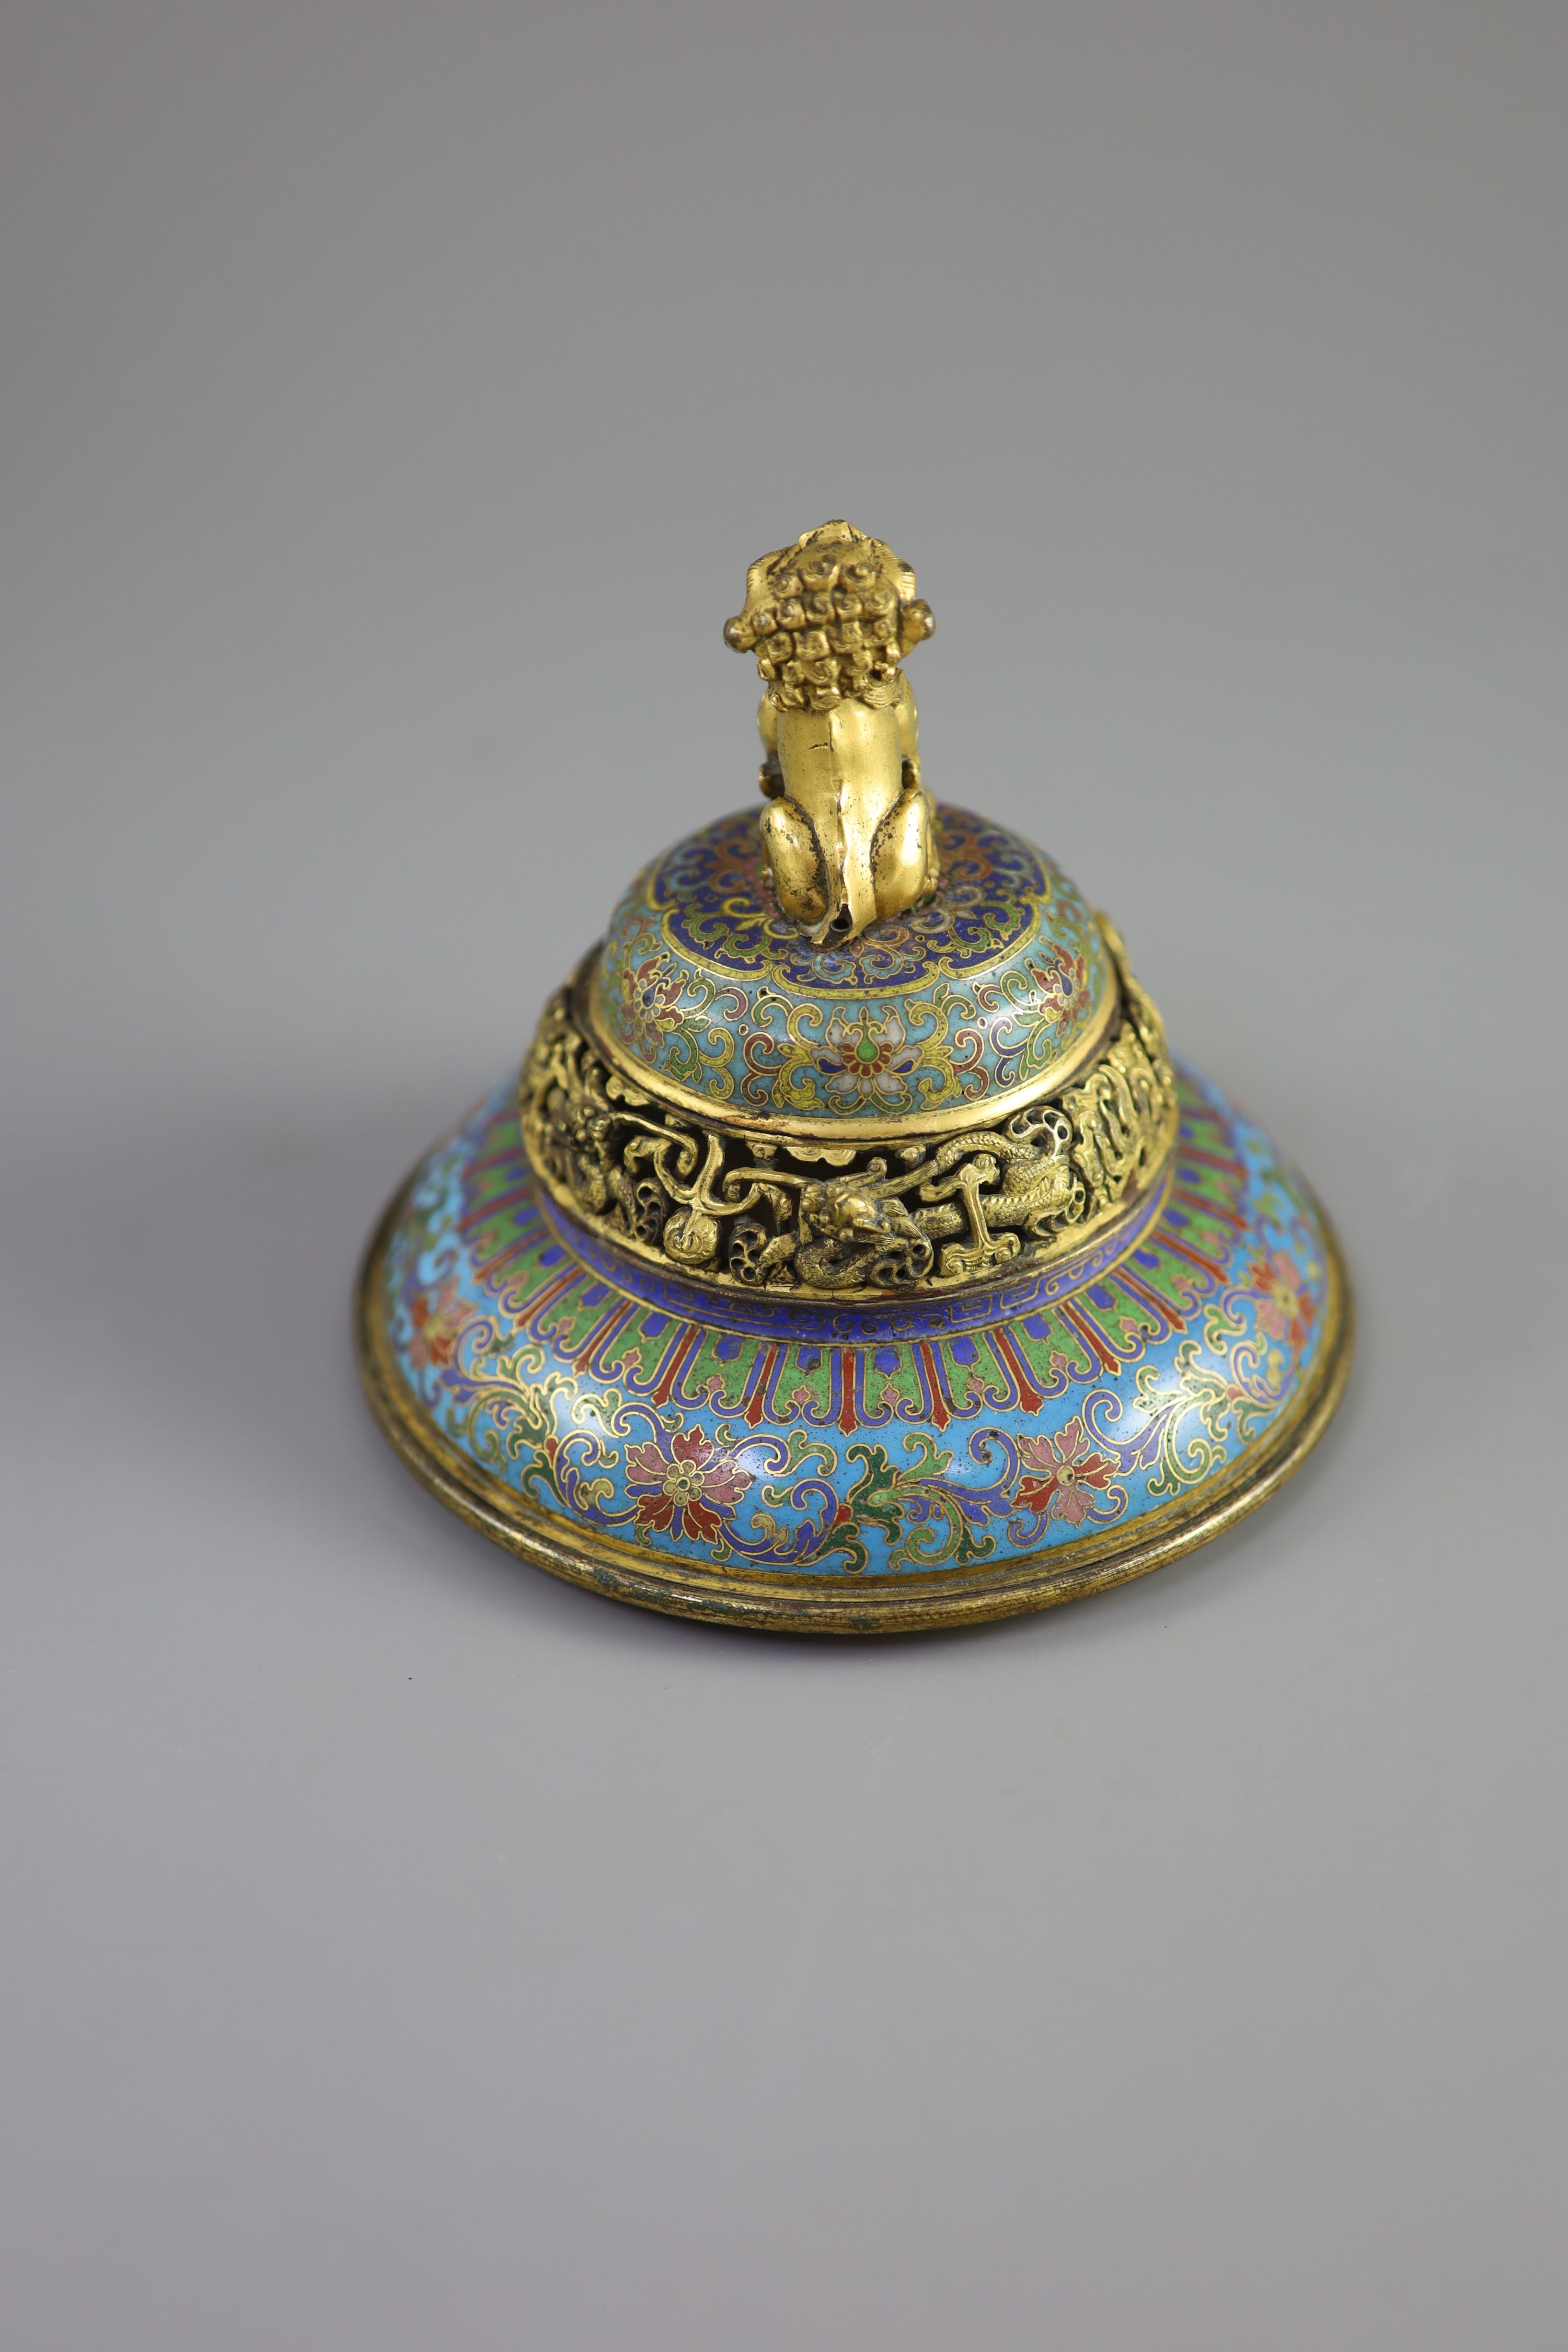 A Chinese cloisonné enamel and gilt bronze cover, late Ming/early Qing, 17th century, 11.5 cm high, 13.5 cm diameter. Provenance - Old Scandinavian collection.